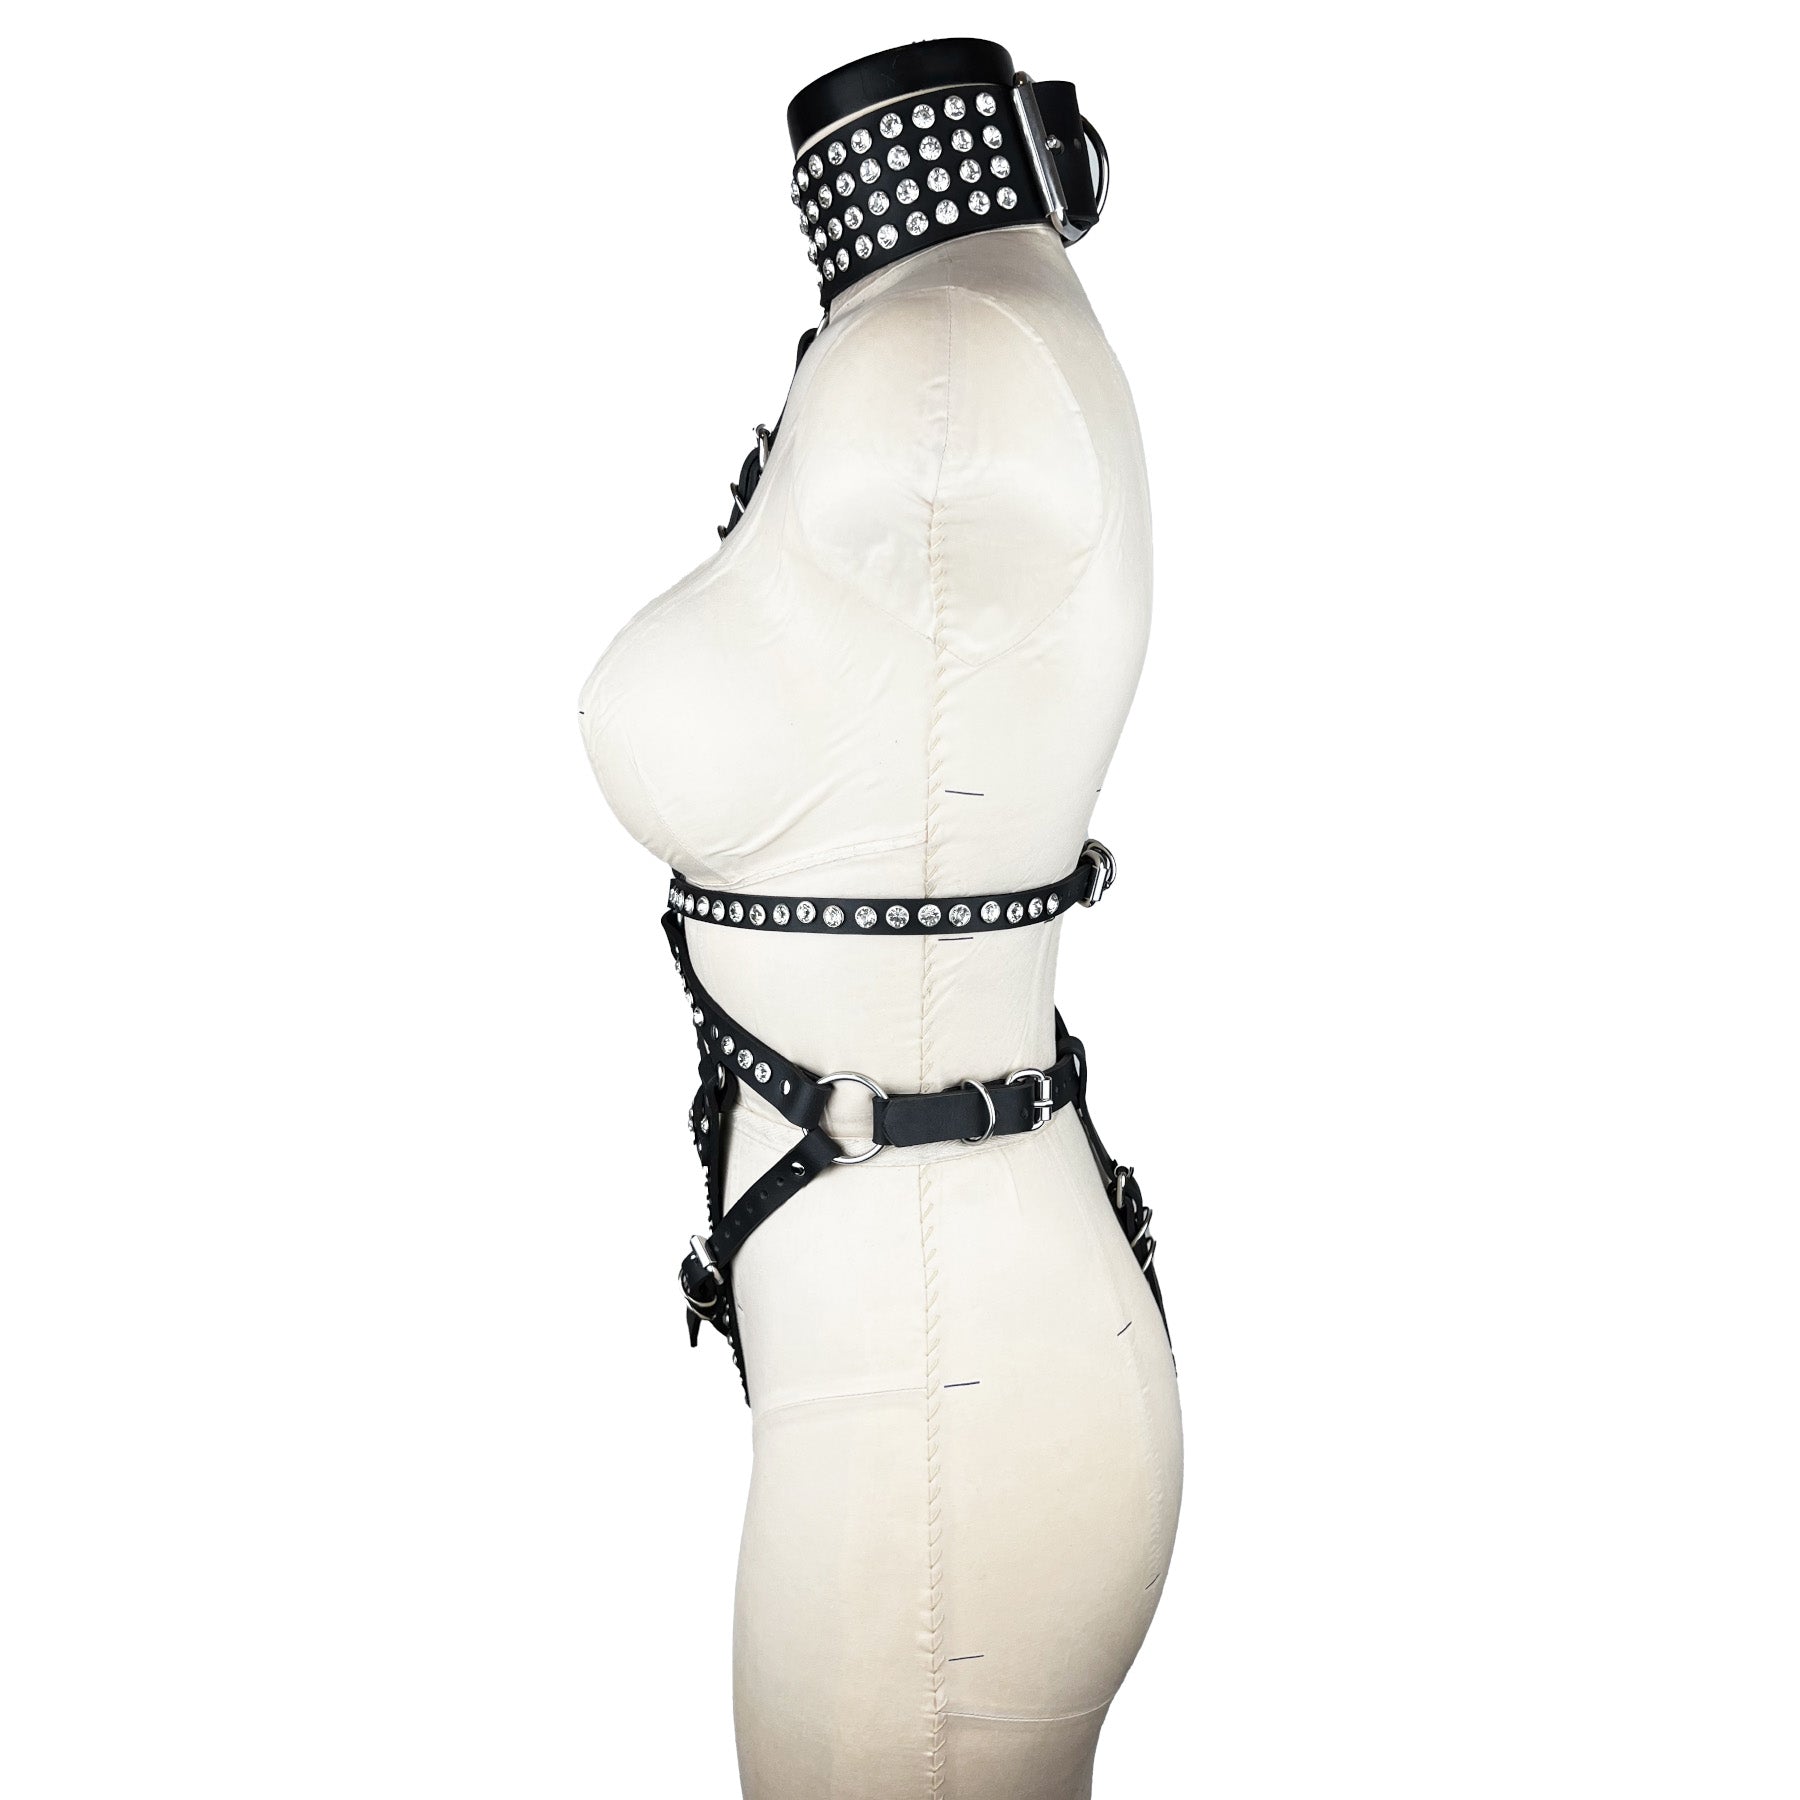 luxury Italian leather and crystals fashion and fetish body harness, bespoke, made-to-order in nyc, side view